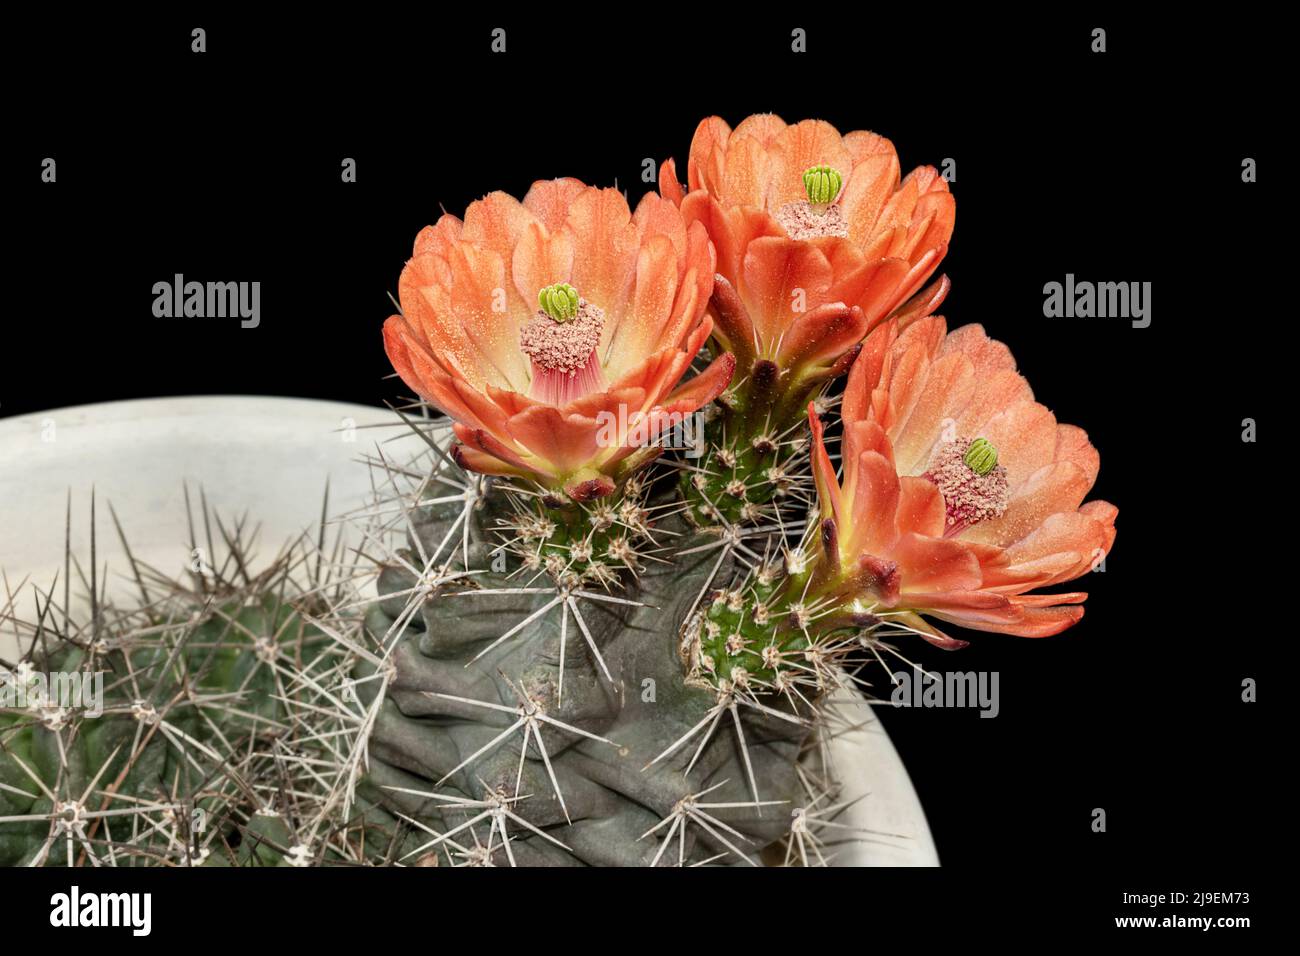 Potted Echinocereus triglochidiatus claret cup hedgehog cactus with three brilliant orange flowers among the dangerous spines on a black background Stock Photo